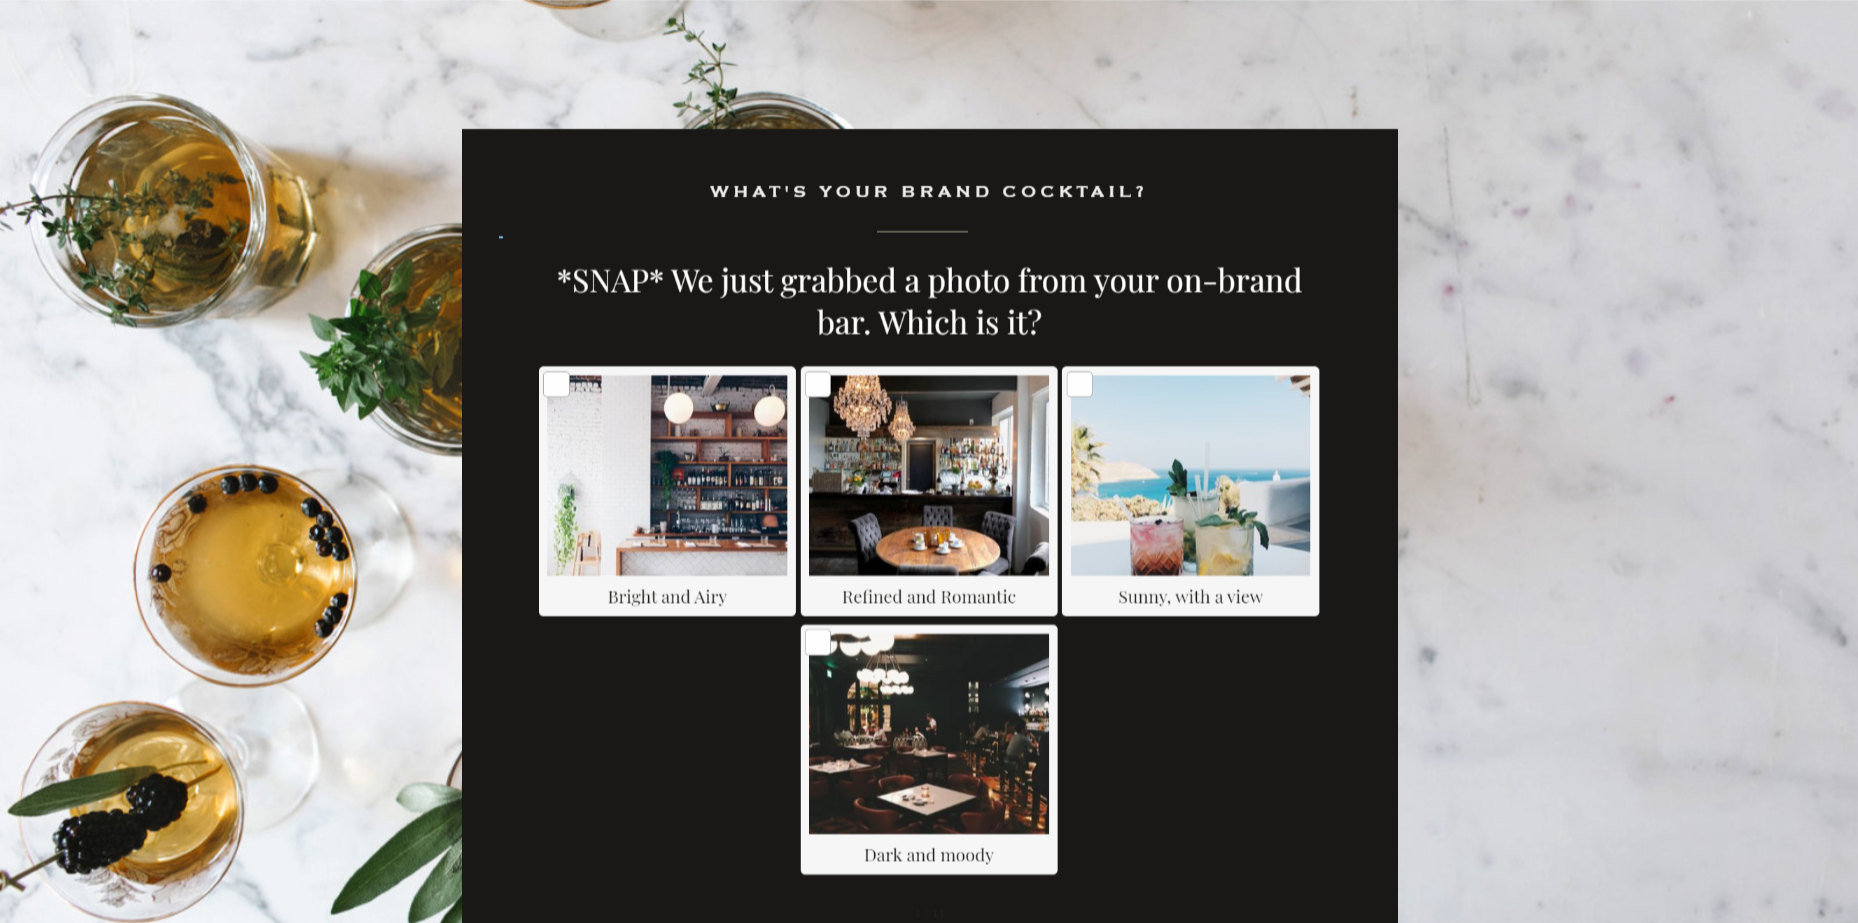 The quiz offers four inspiration photos to choose from for the reader’s “on-brand bar.” In the background, cocktails with herb and fruit garnishes sit on a marble tabletop.